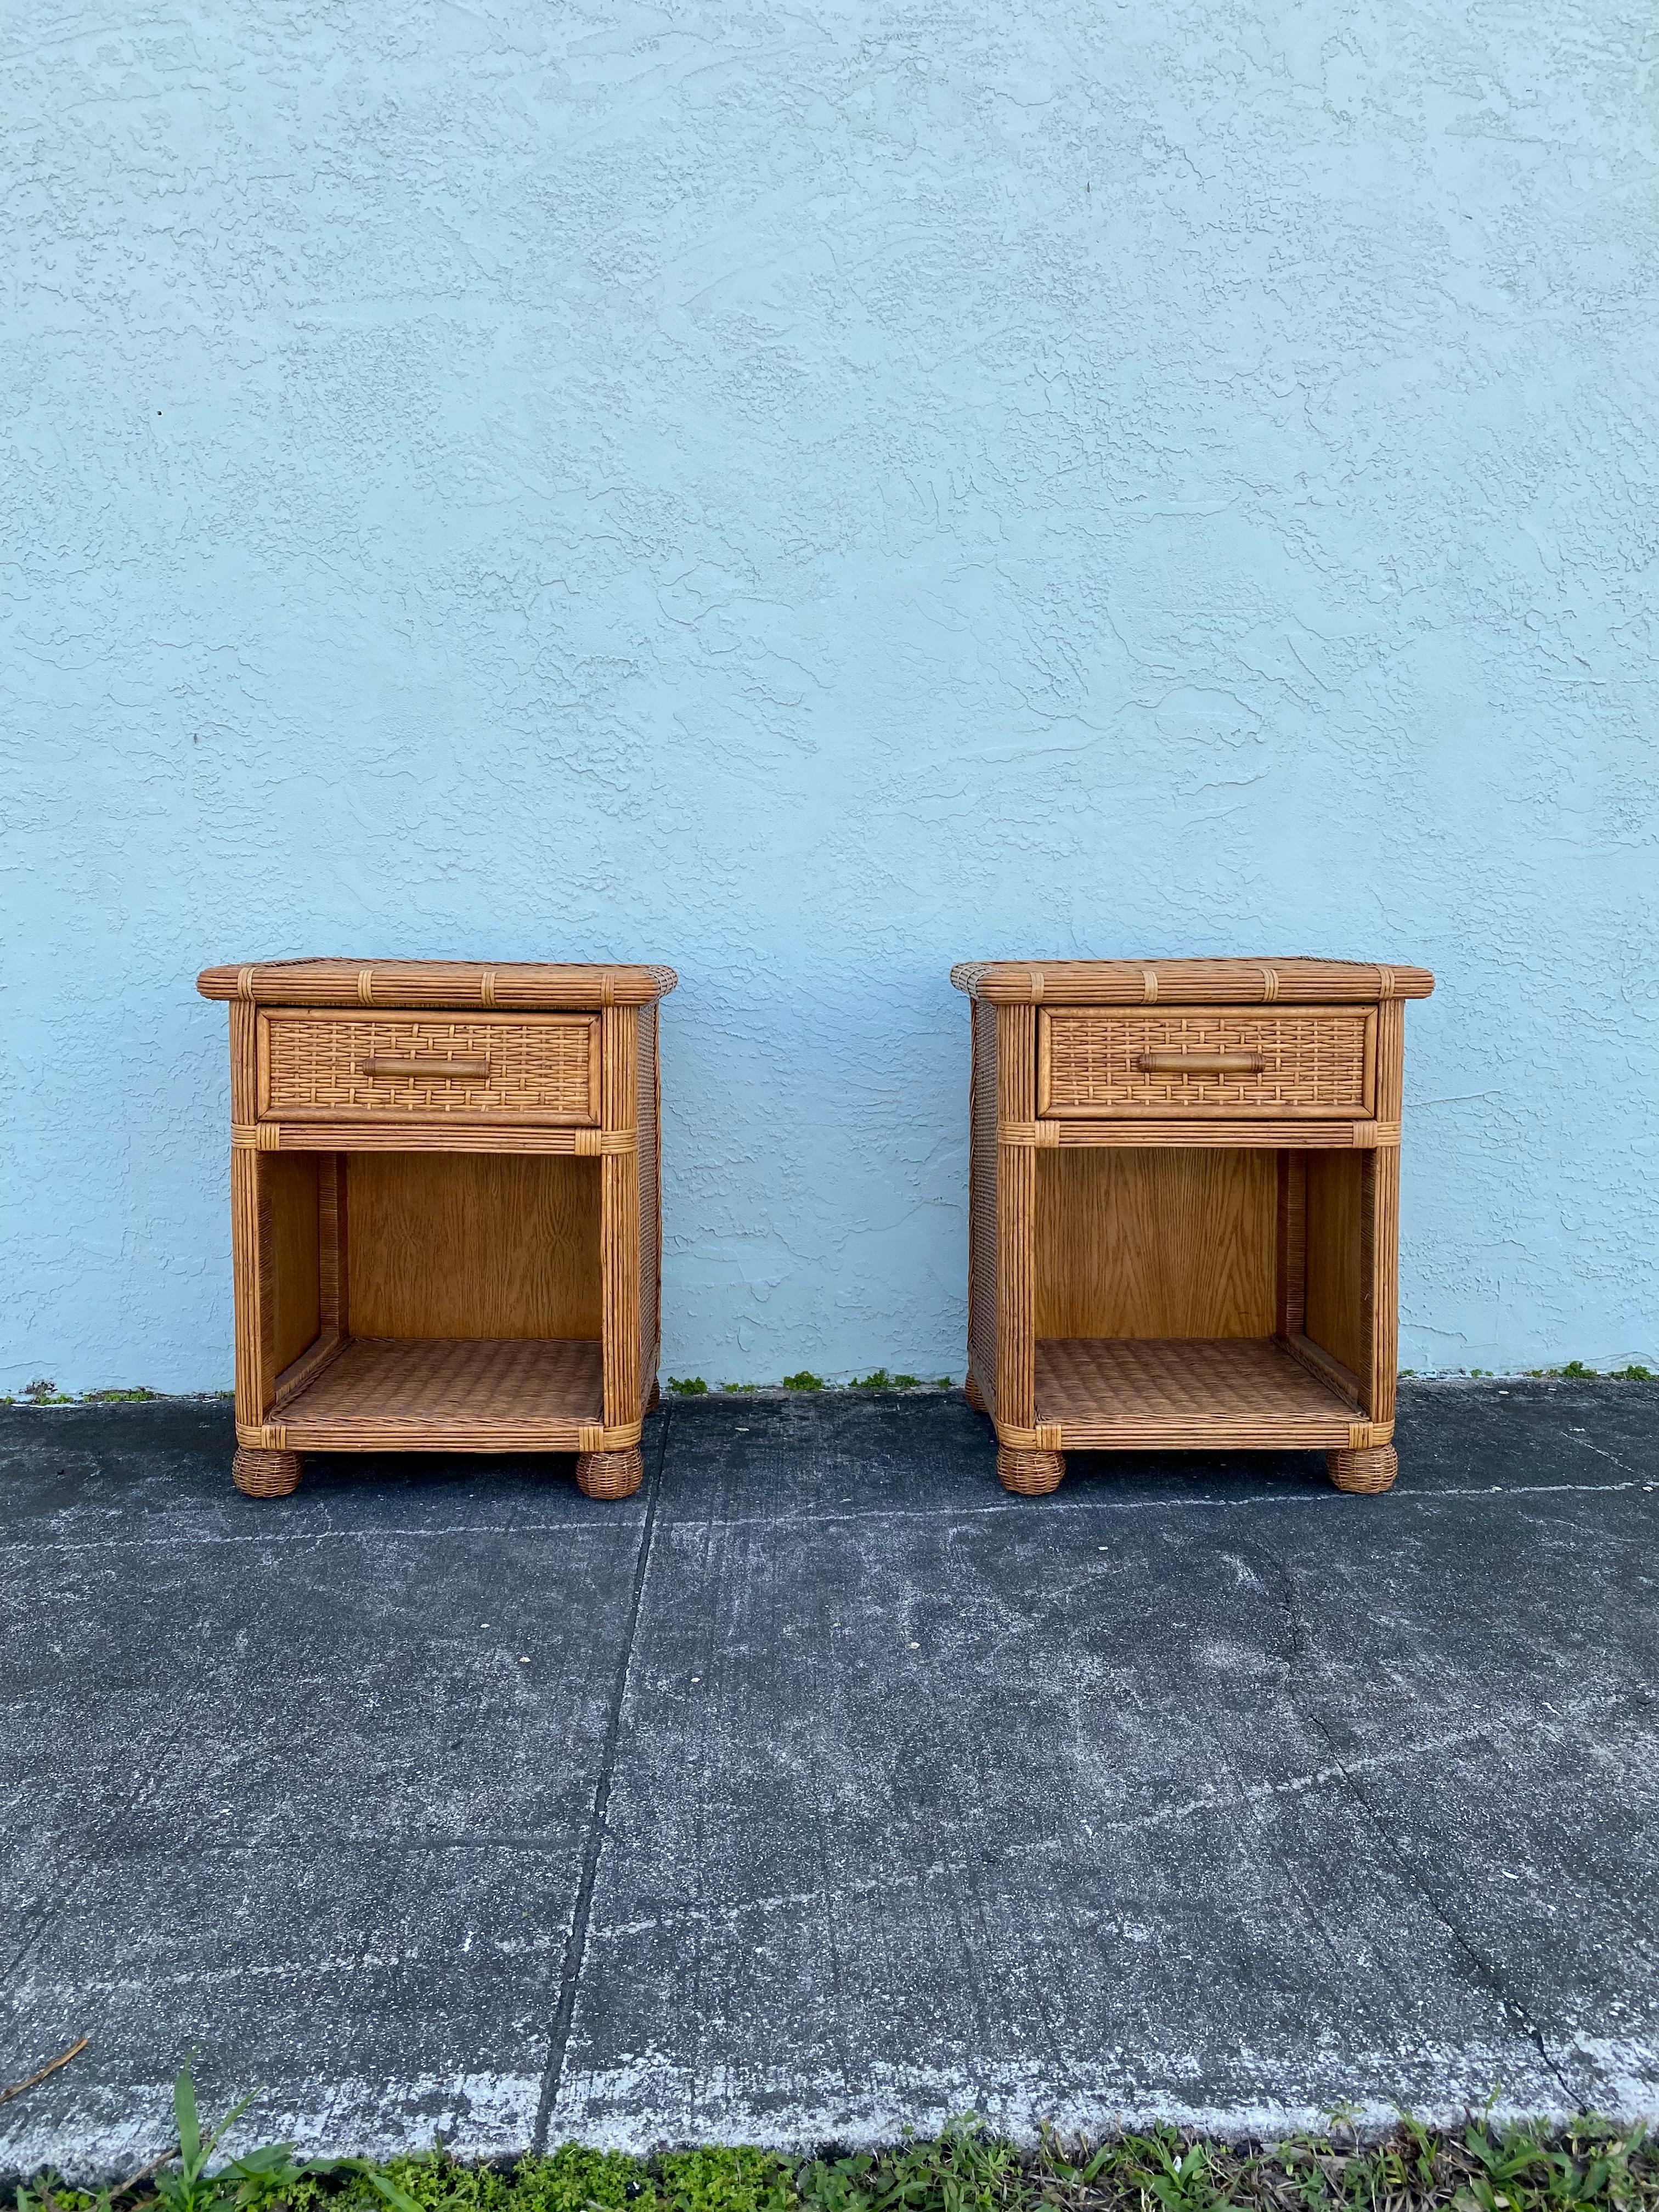 On offer on this occasion is one of the most stunning, rattan nightstands or end tables you could hope to find. Outstanding design is exhibited throughout. The beautiful set is statement piece and packed with personality!  Just look at the gorgeous